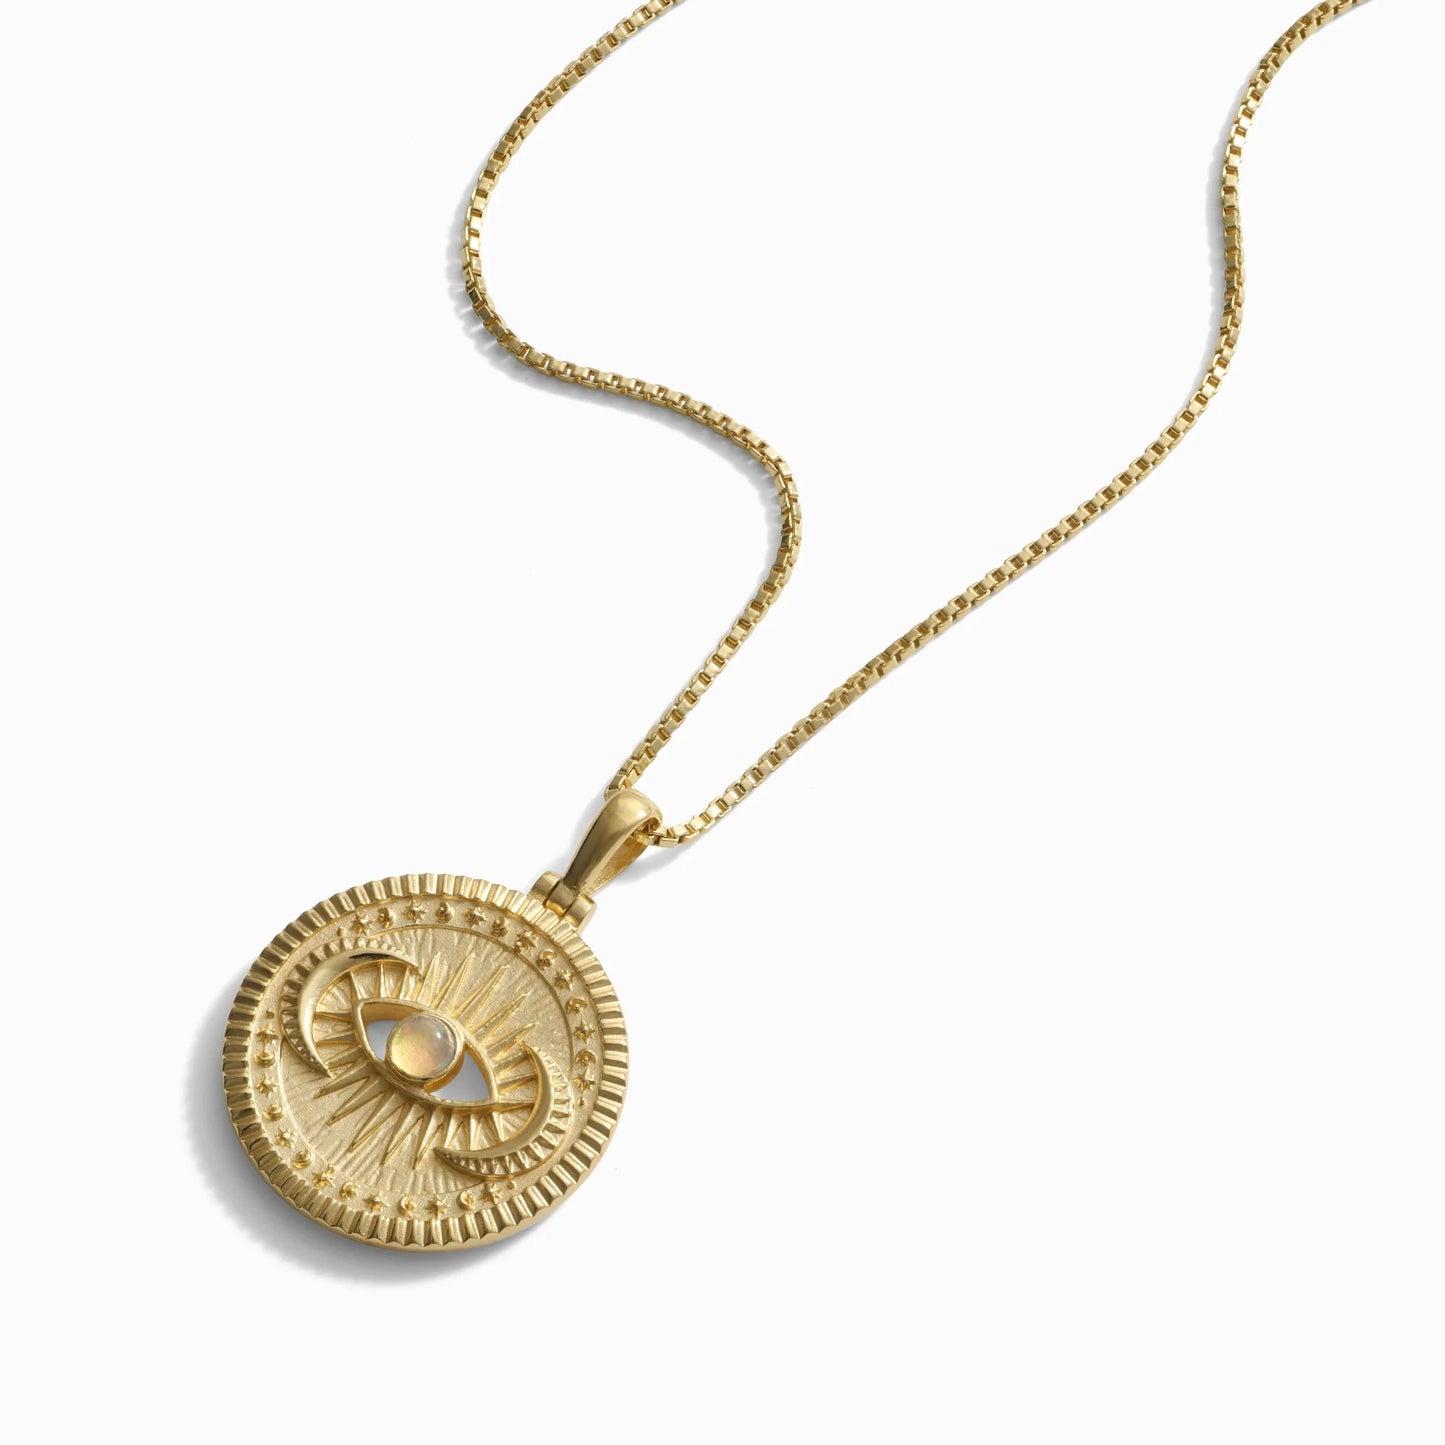 Cosmic Eye Coin Necklace by Awe Inspired